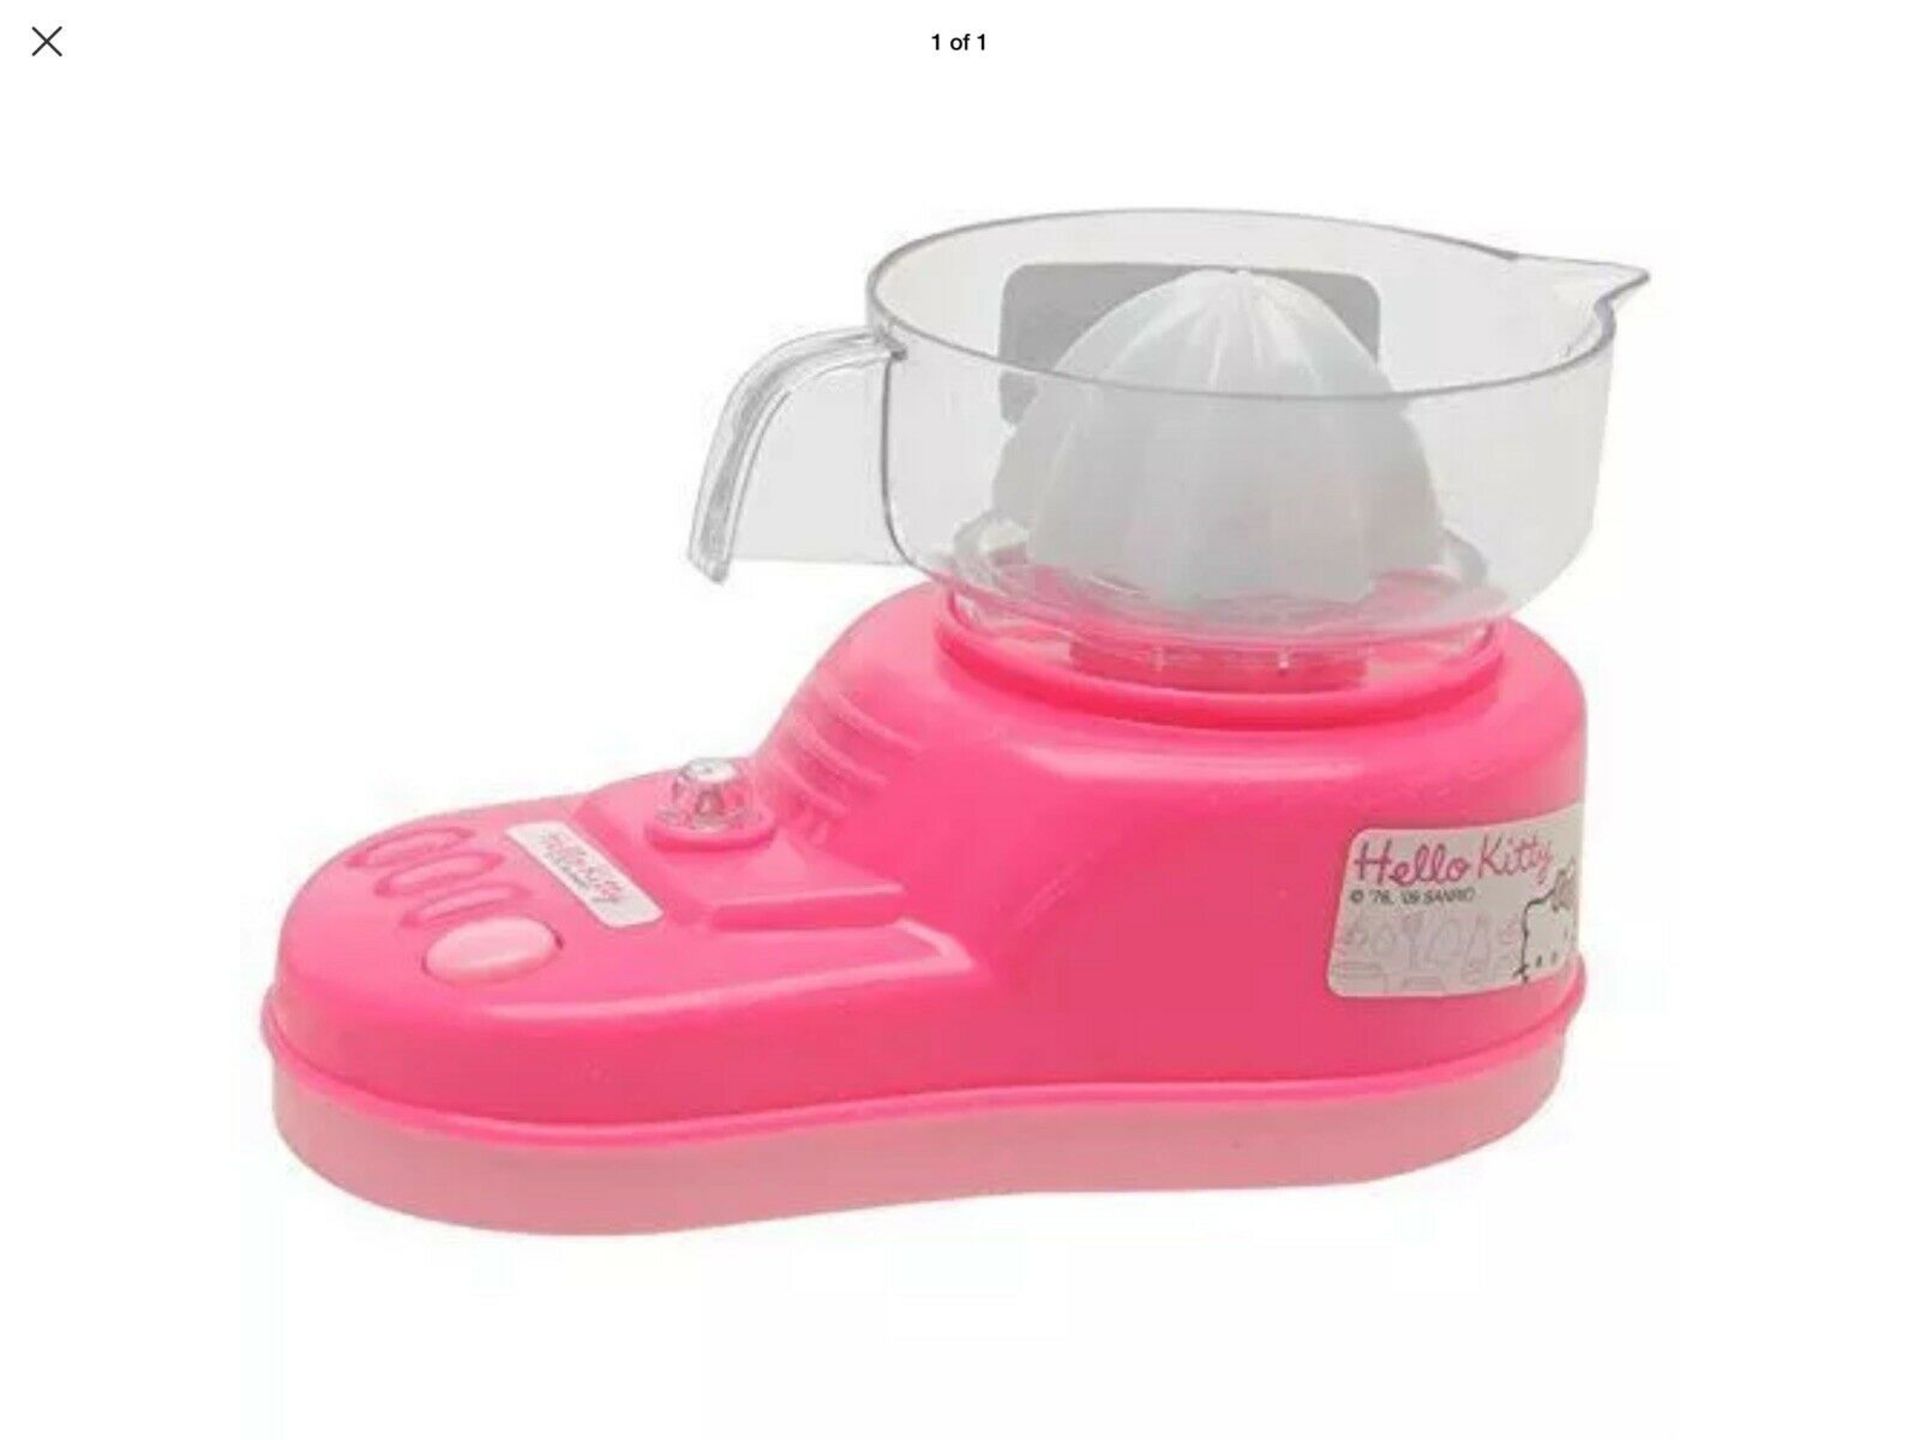 Hello Kitty - Pink Toy Blender